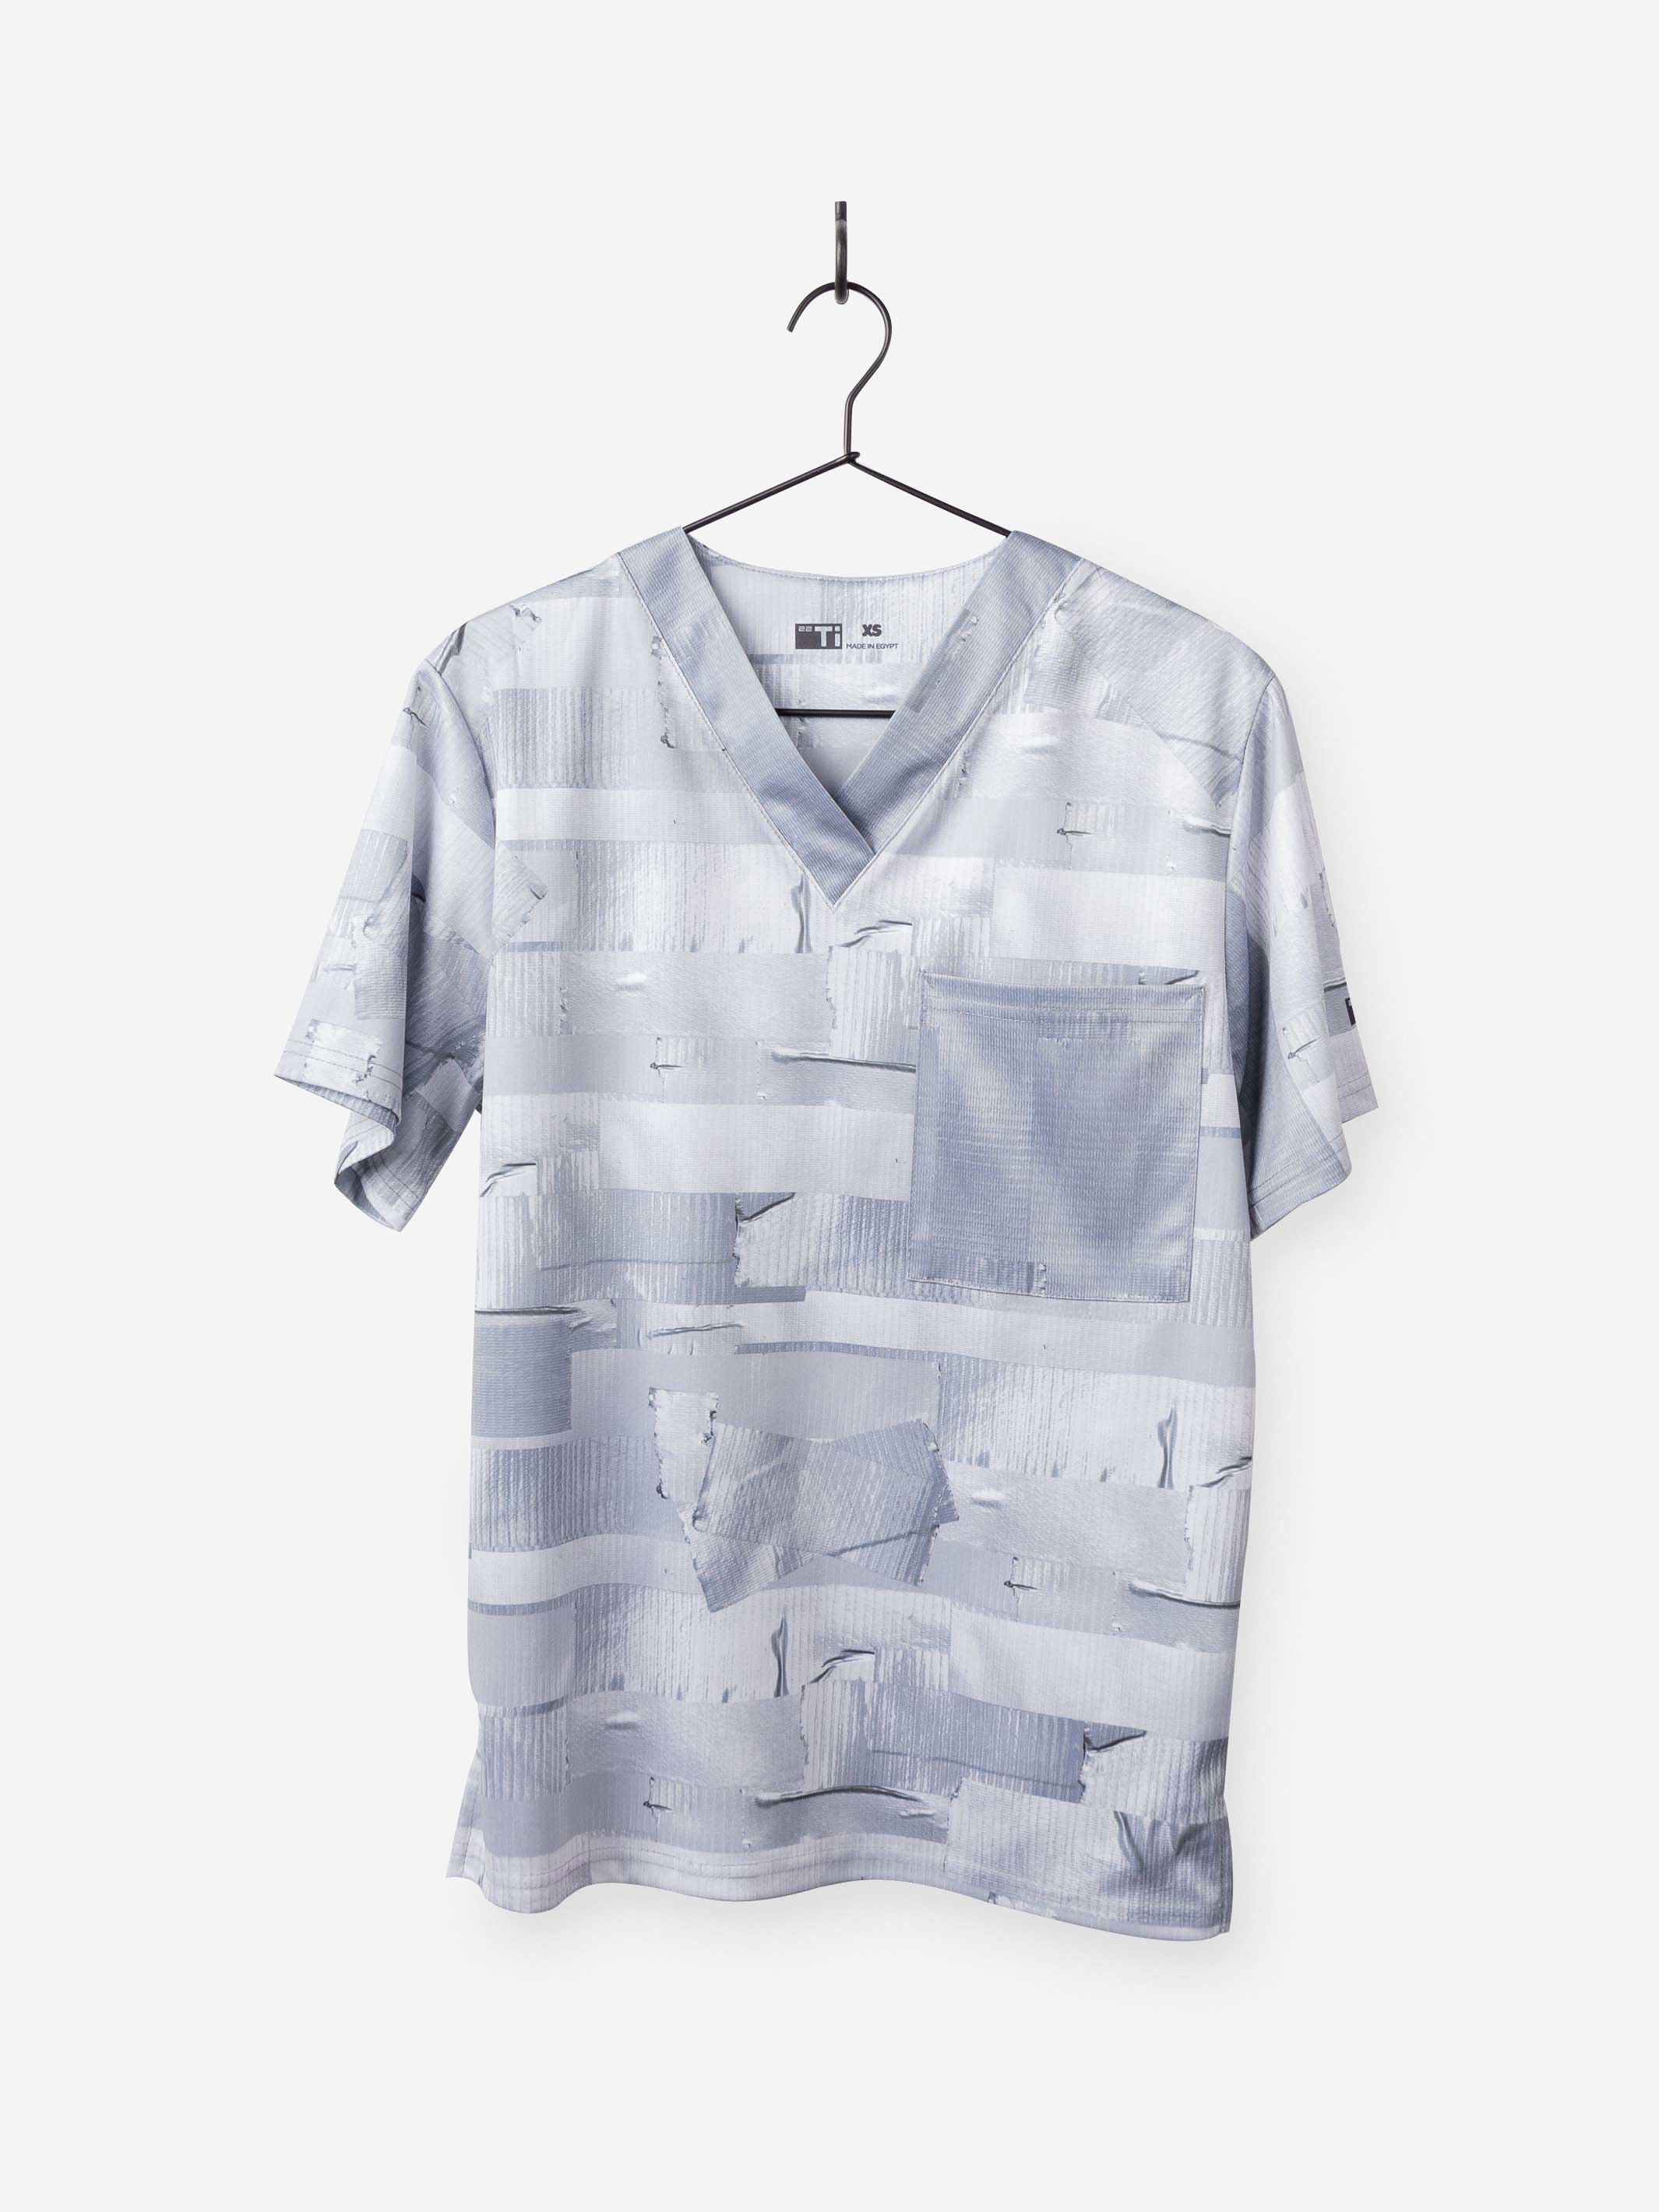 Funny Duct Tape Print Scrub Top For Men 